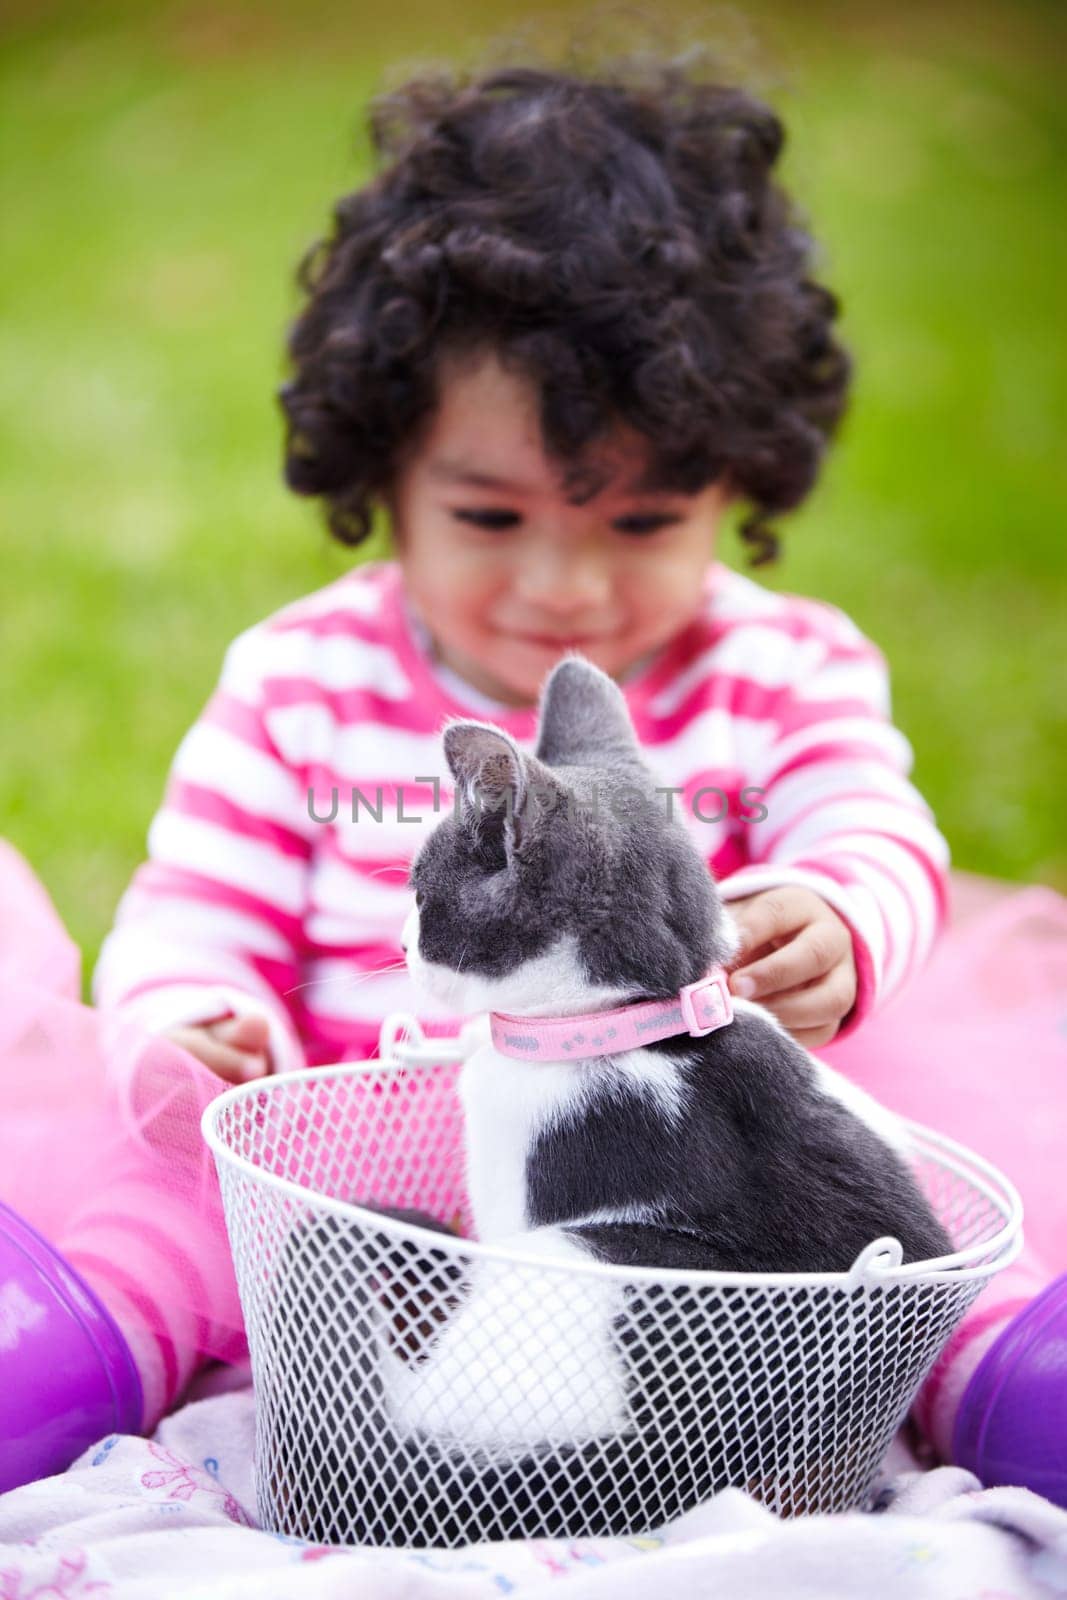 Nature, girl and kitten in a basket in a garden on the grass on a summer weekend together. Happy, sunshine and child or kid sitting and having fun with cat or feline animal pet on lawn in a field